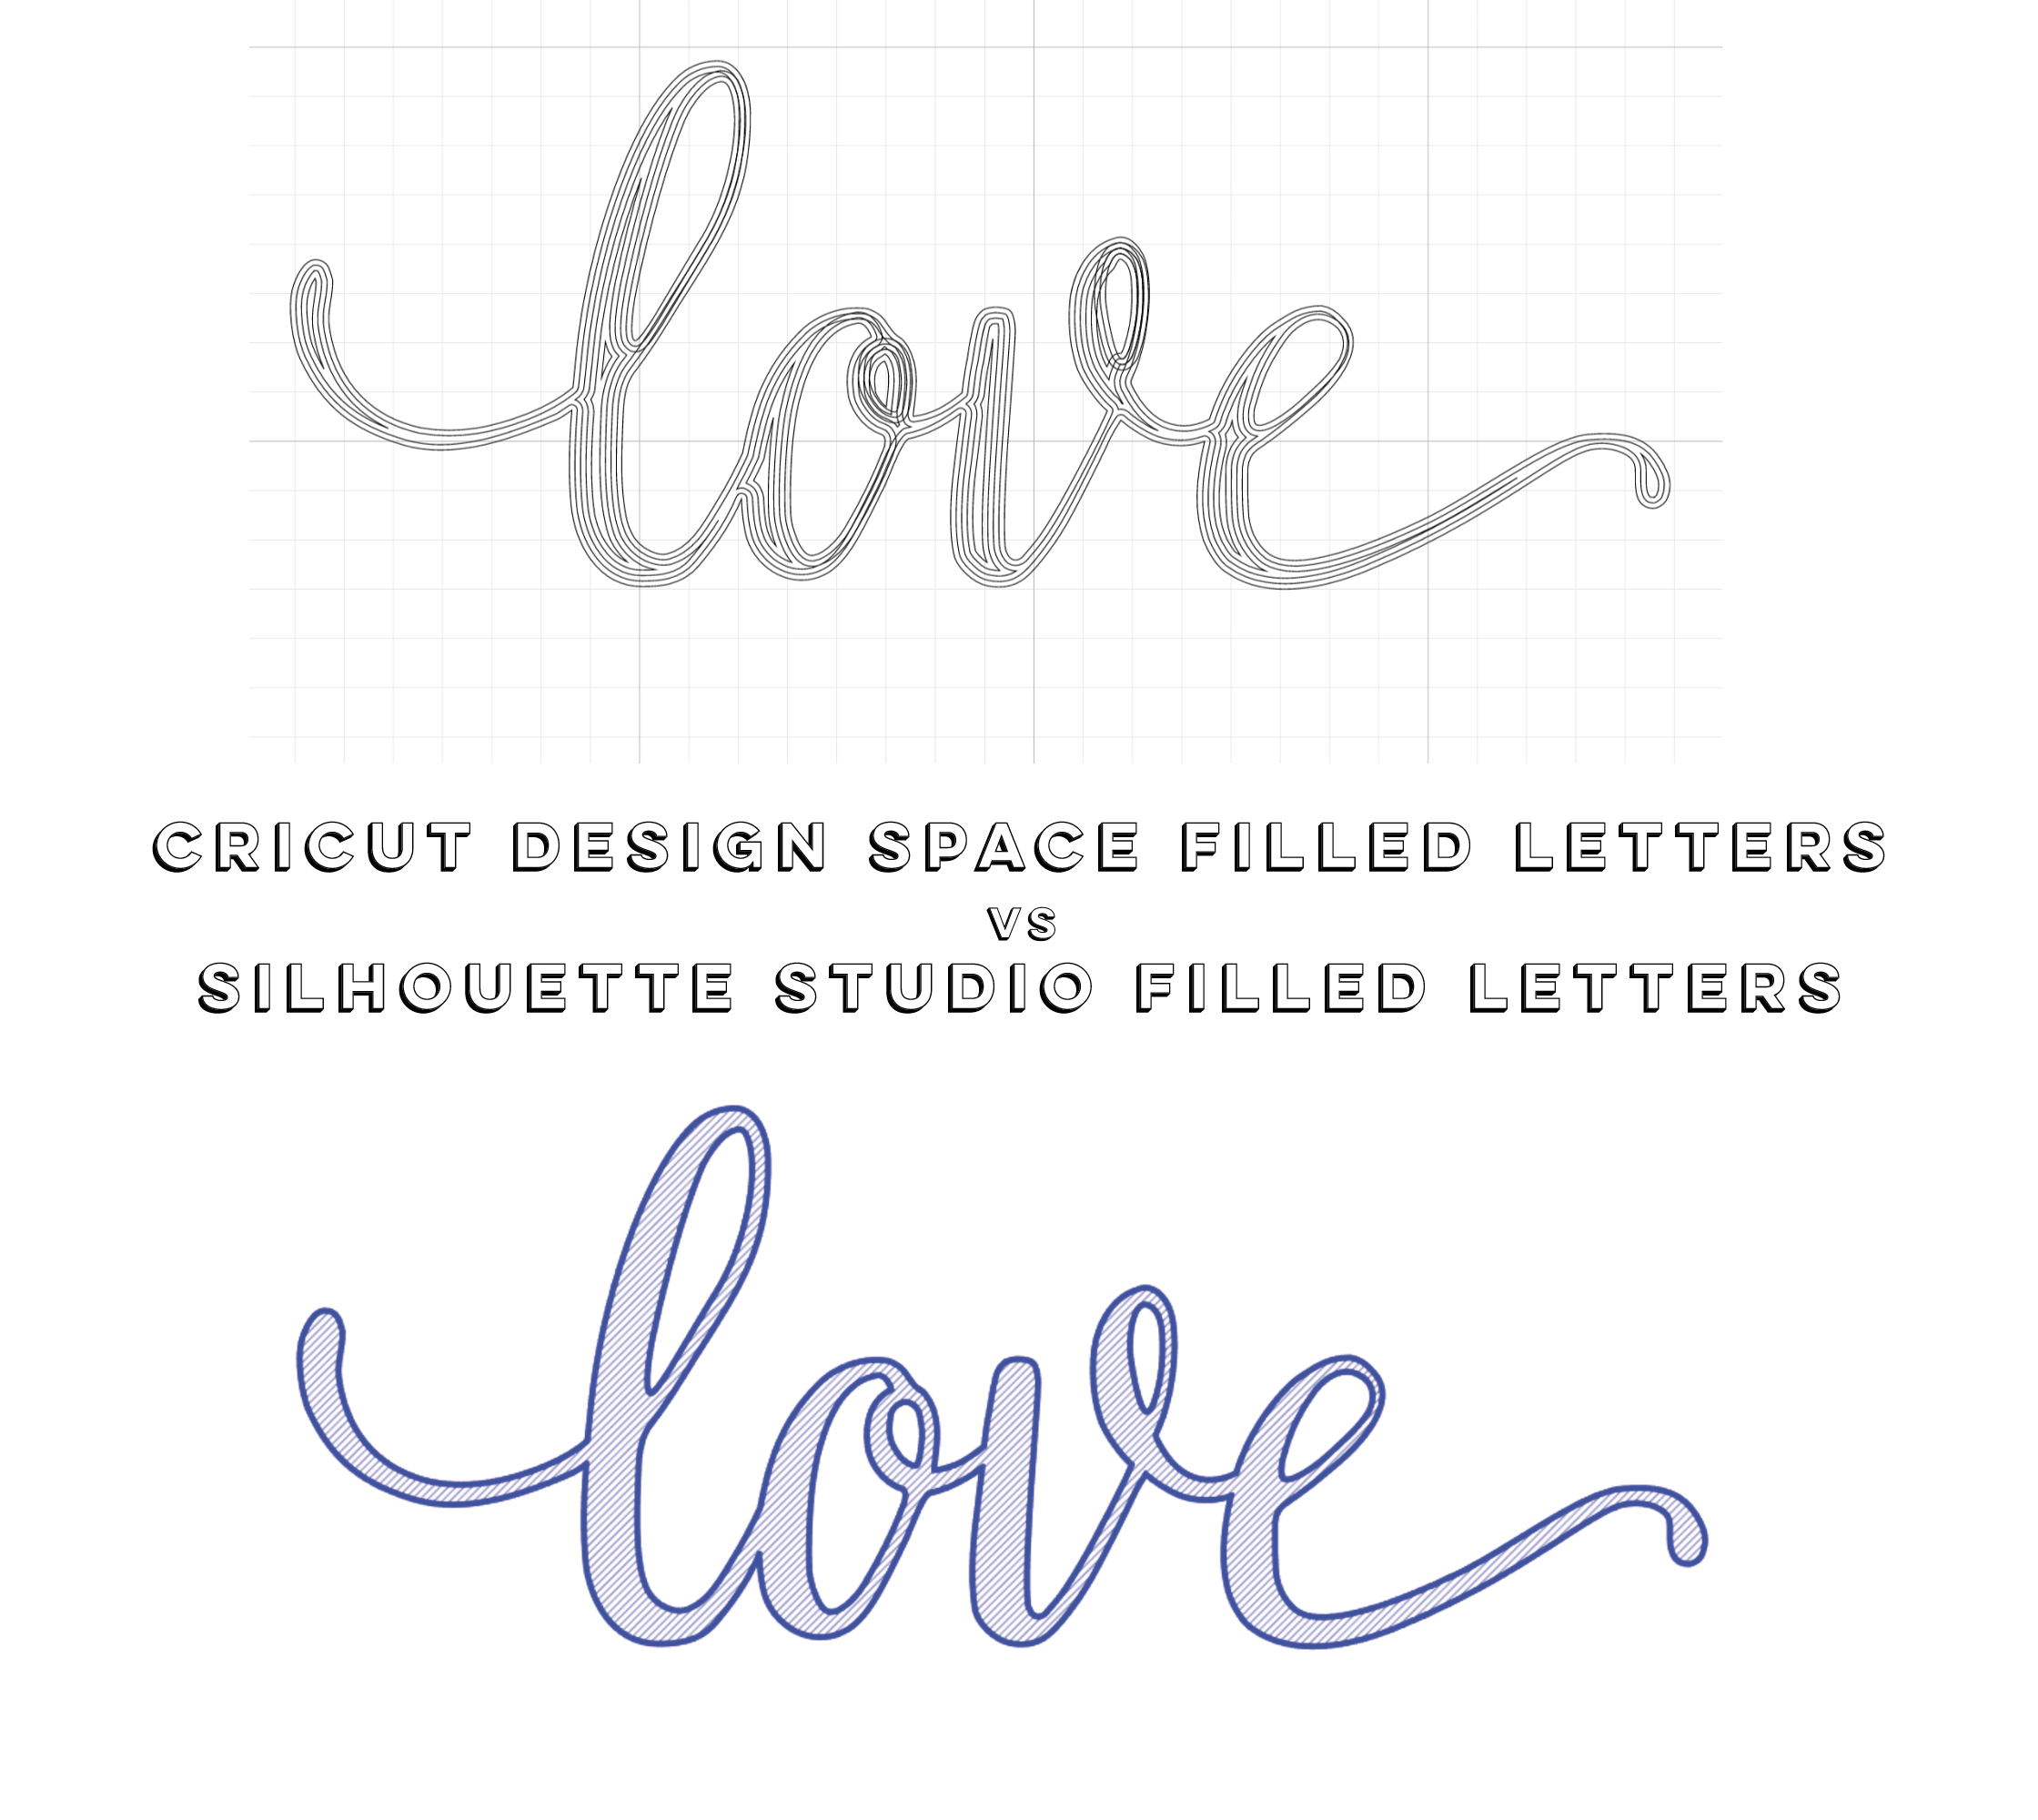 Tips & Tricks on Cutting Small Letters with Cricut